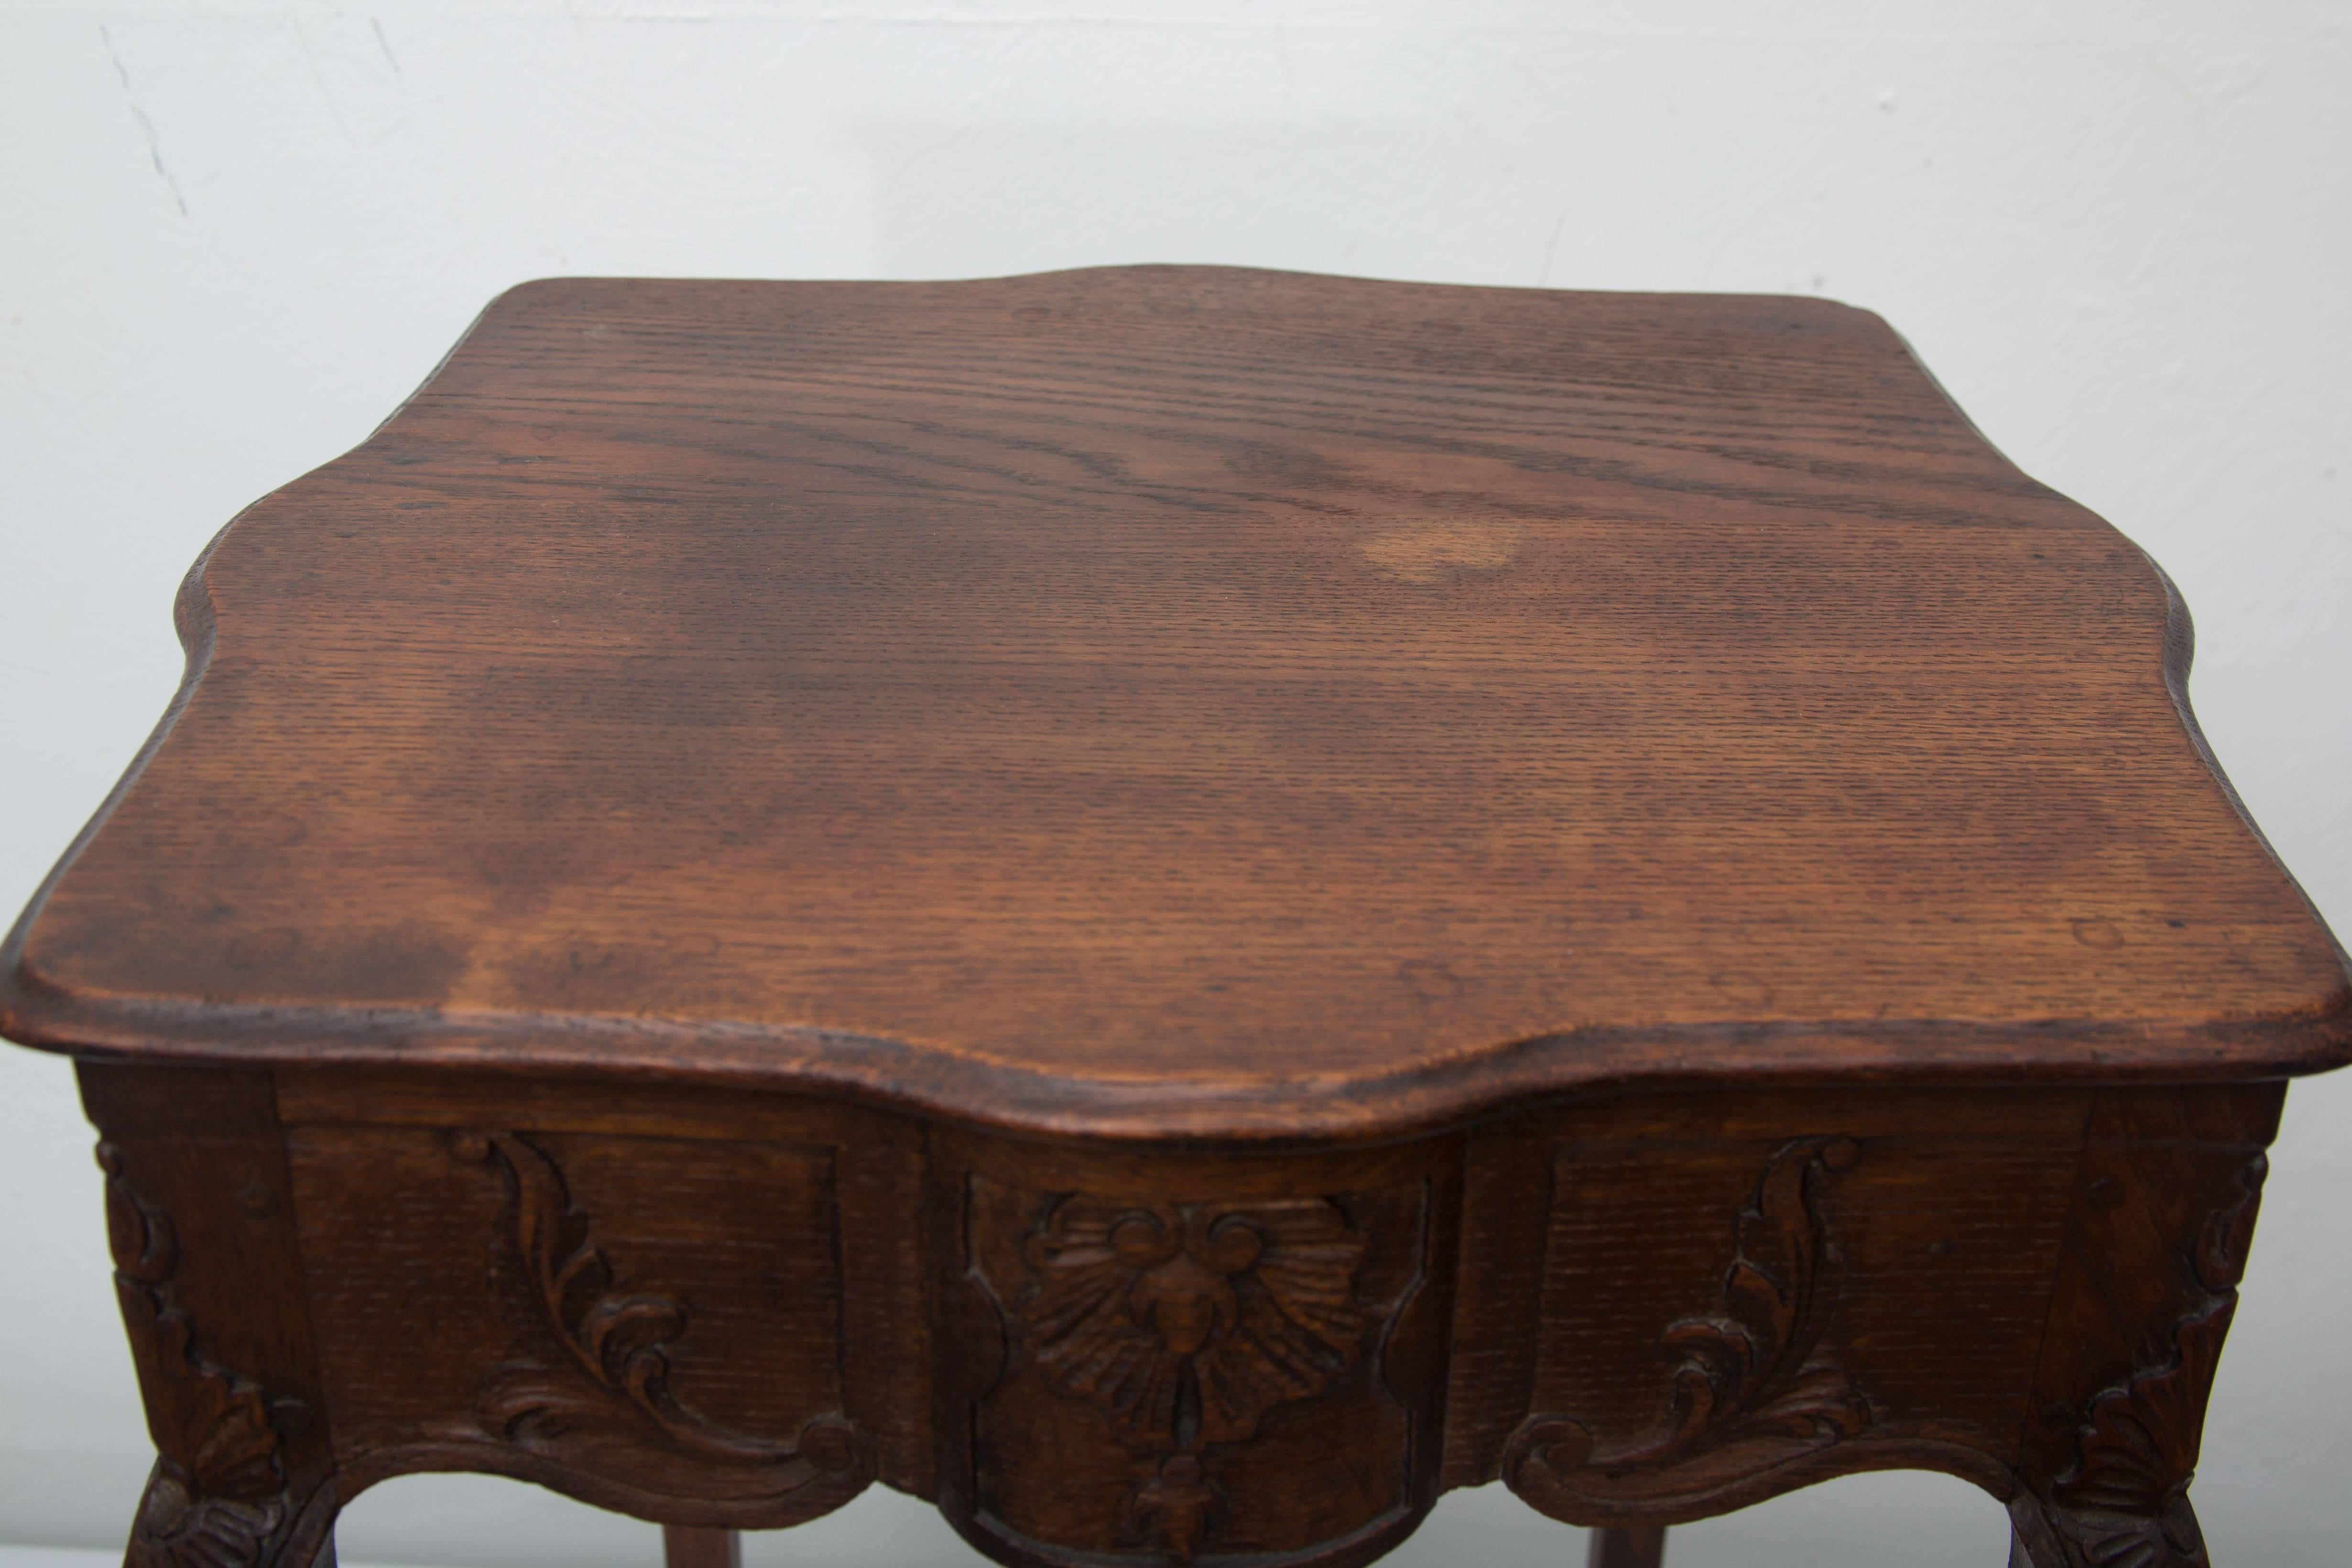 This small French dark oak and hand-carved side table is a perfect accent for an old world interior. It has a carved scalloped frieze and raised on delicate legs ending in hoof feet. Late 19th century.